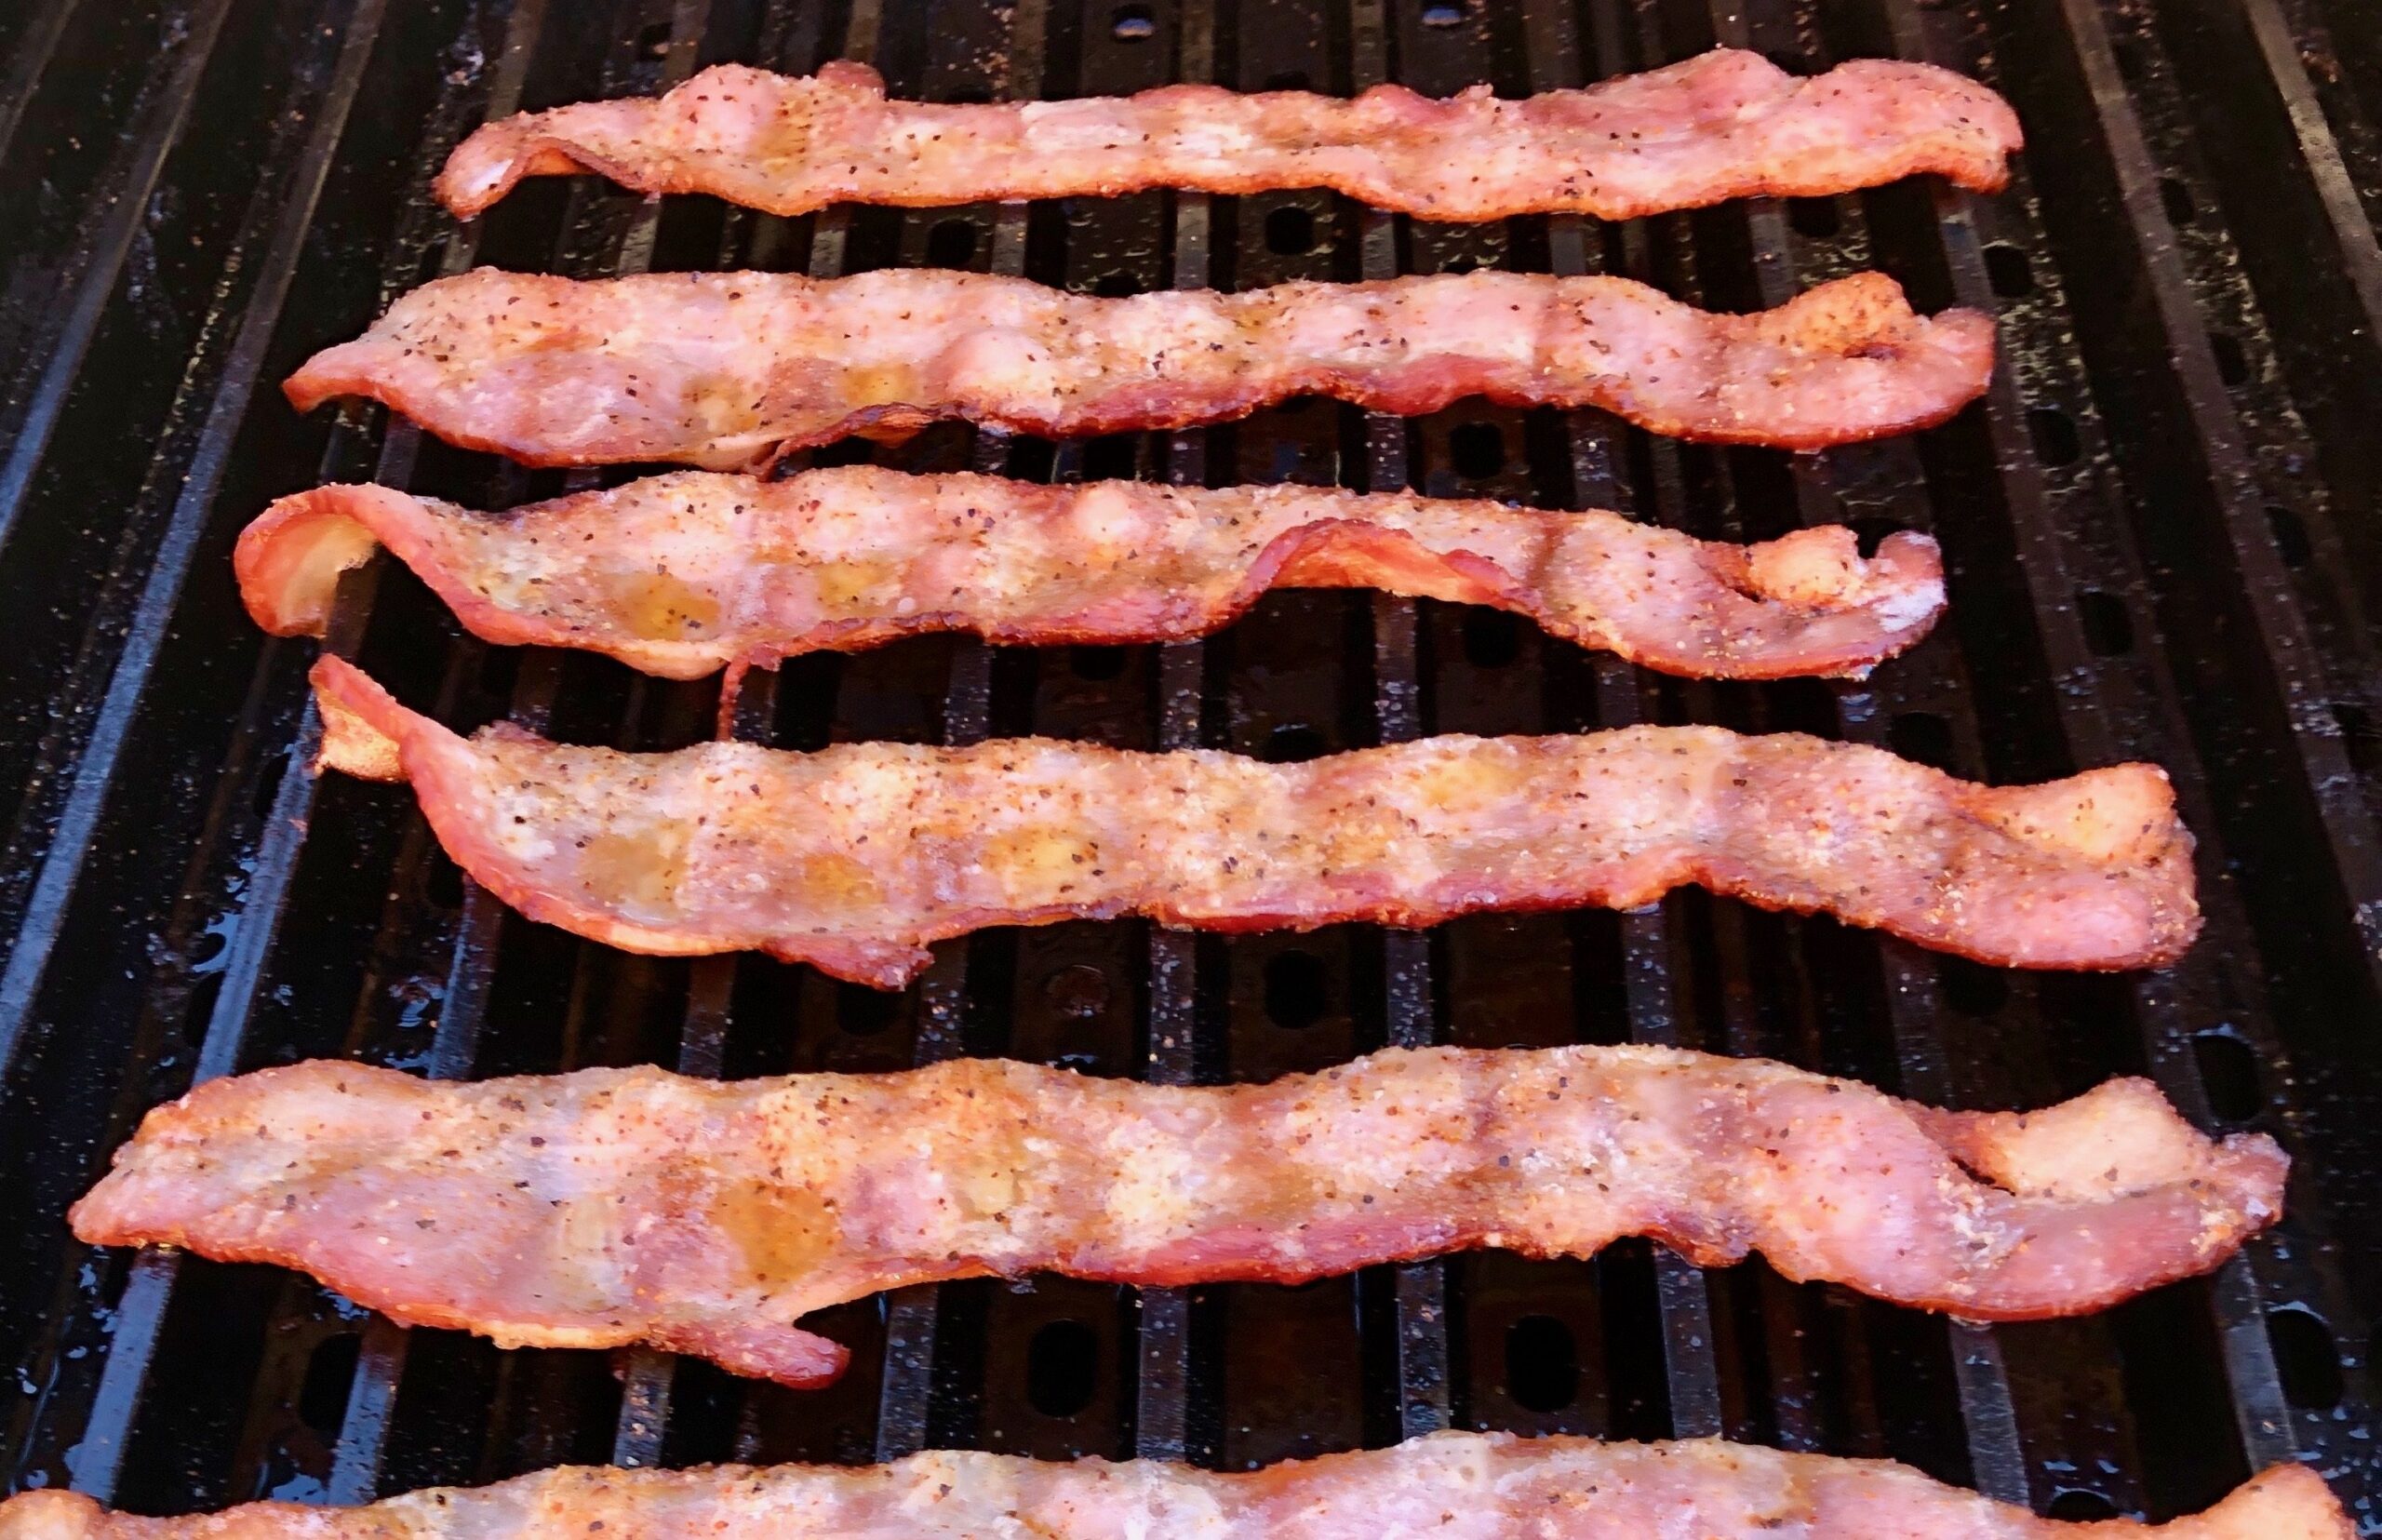 Cookies Bacon on the Smoker or Grill